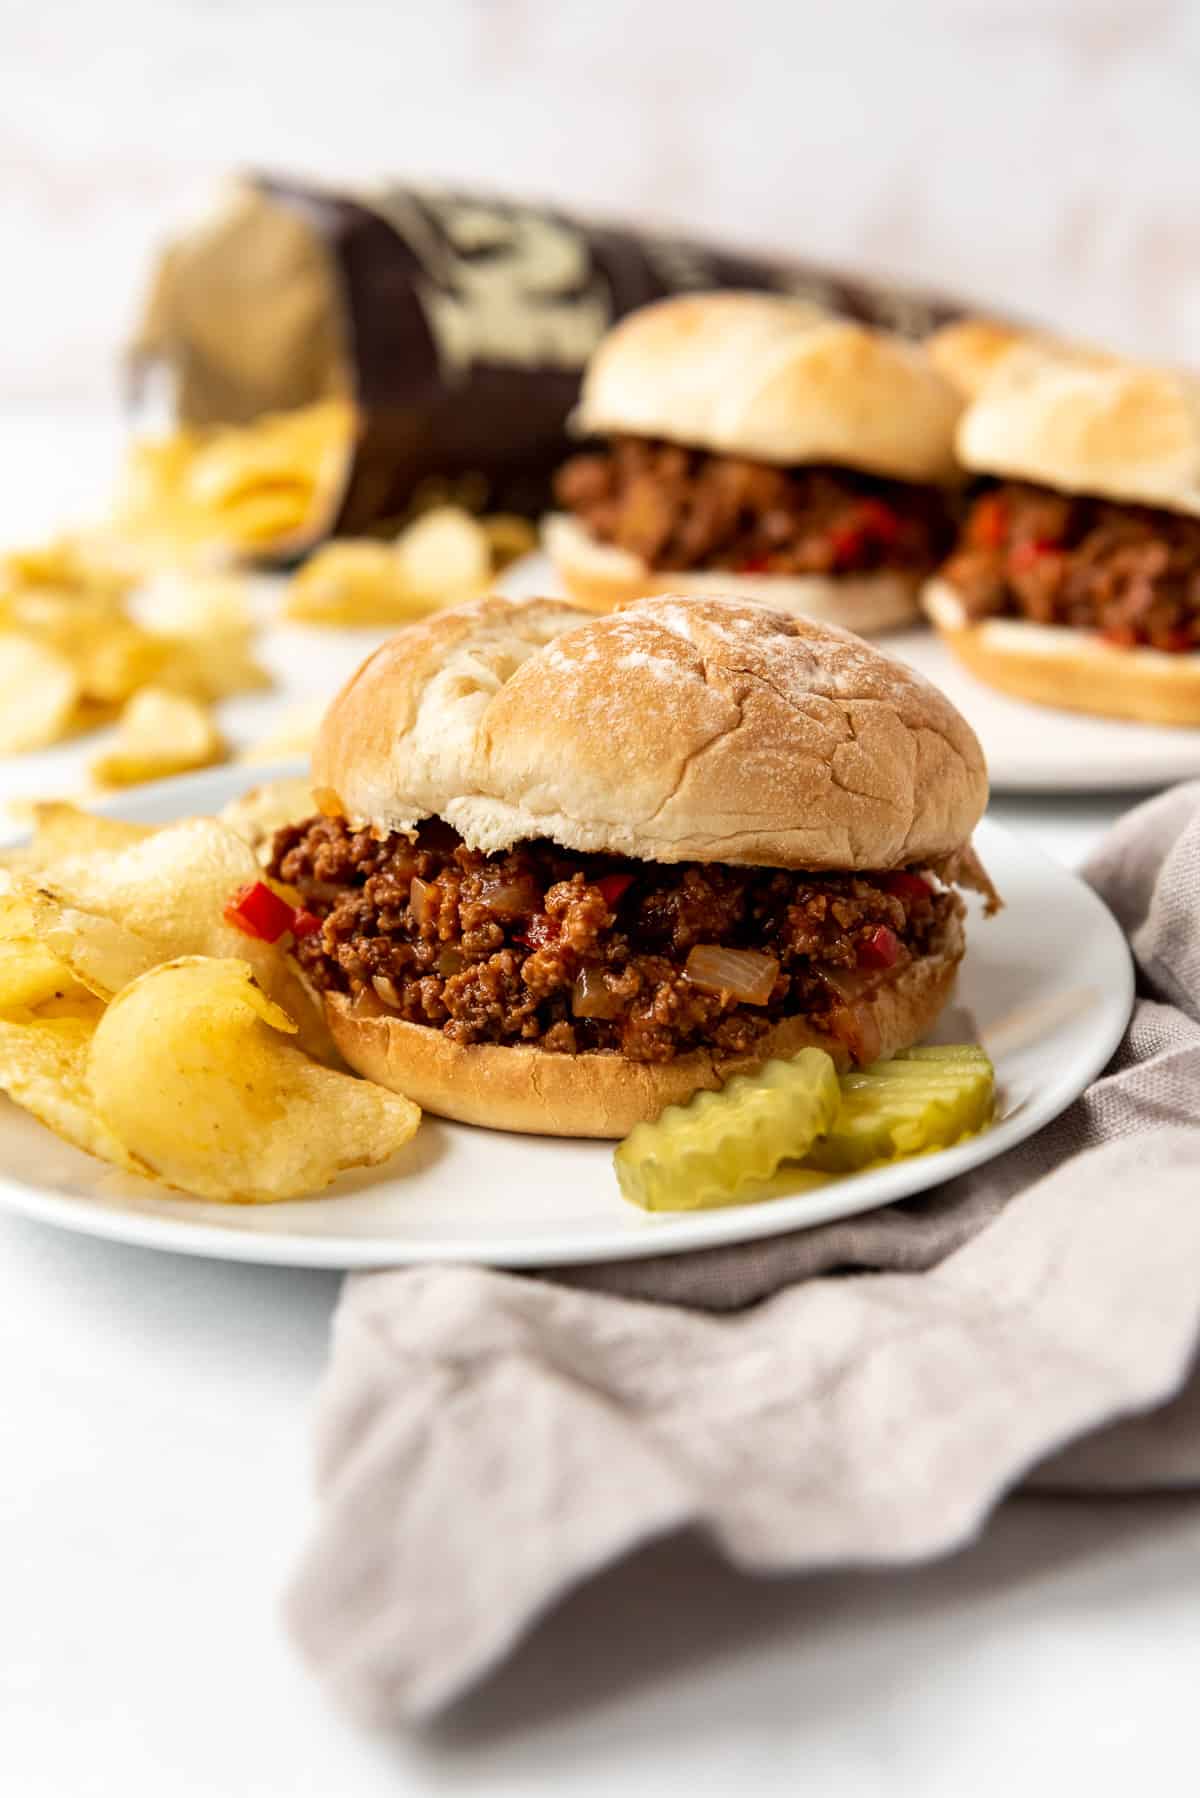 A sloppy joe sandwich on a plate next to a linen napkin and in front of a bag of chips and more sloppy joe sandwiches.